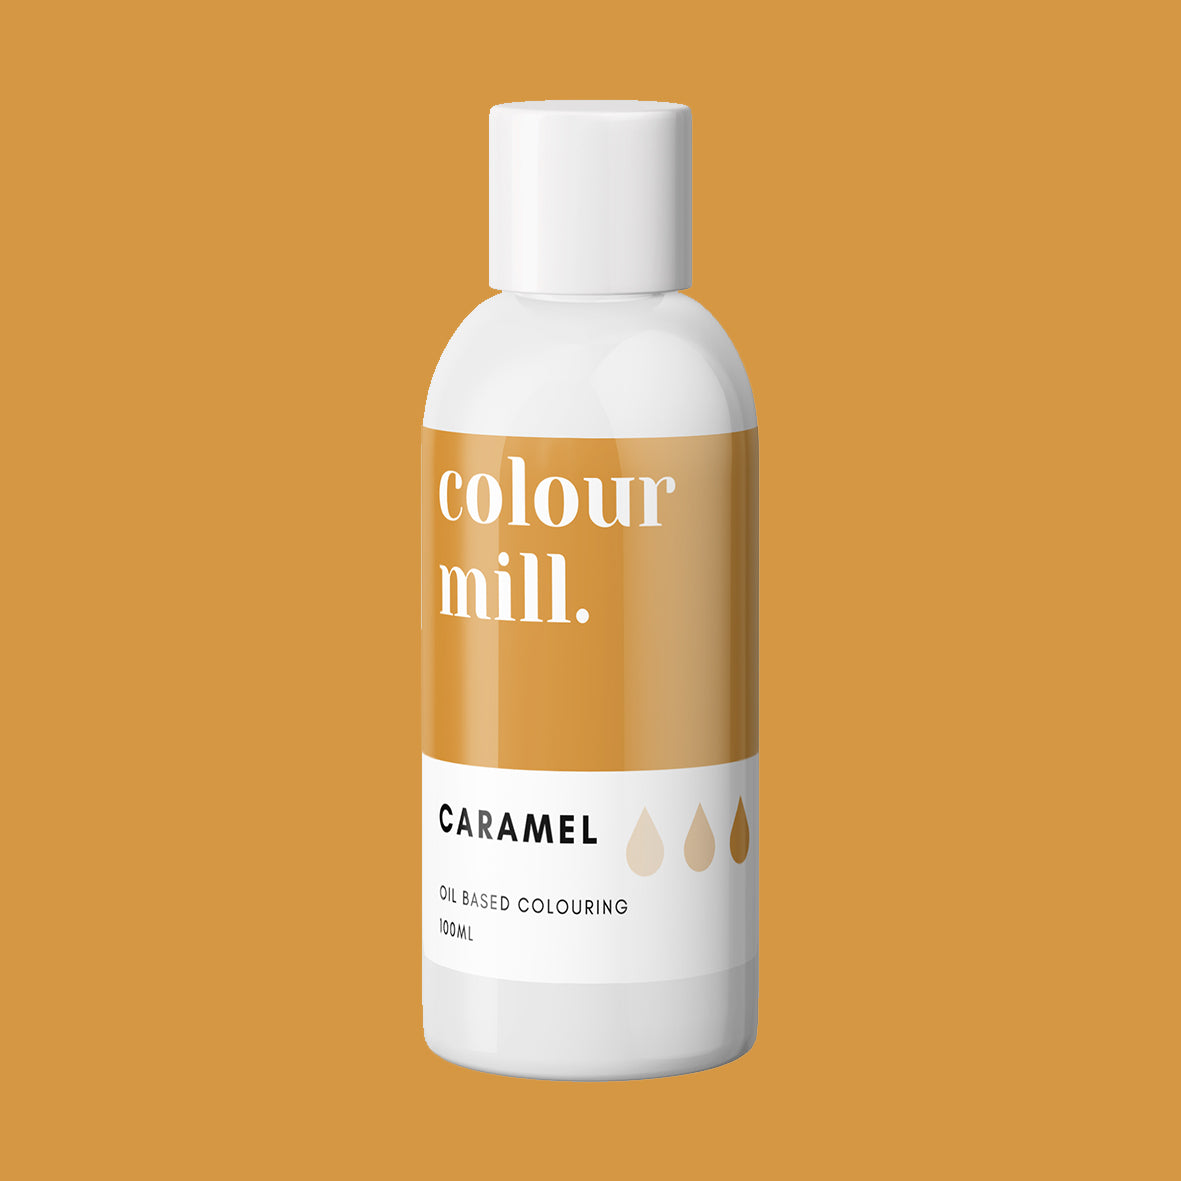 CARAMEL oil based concentrated icing colouring 100ml